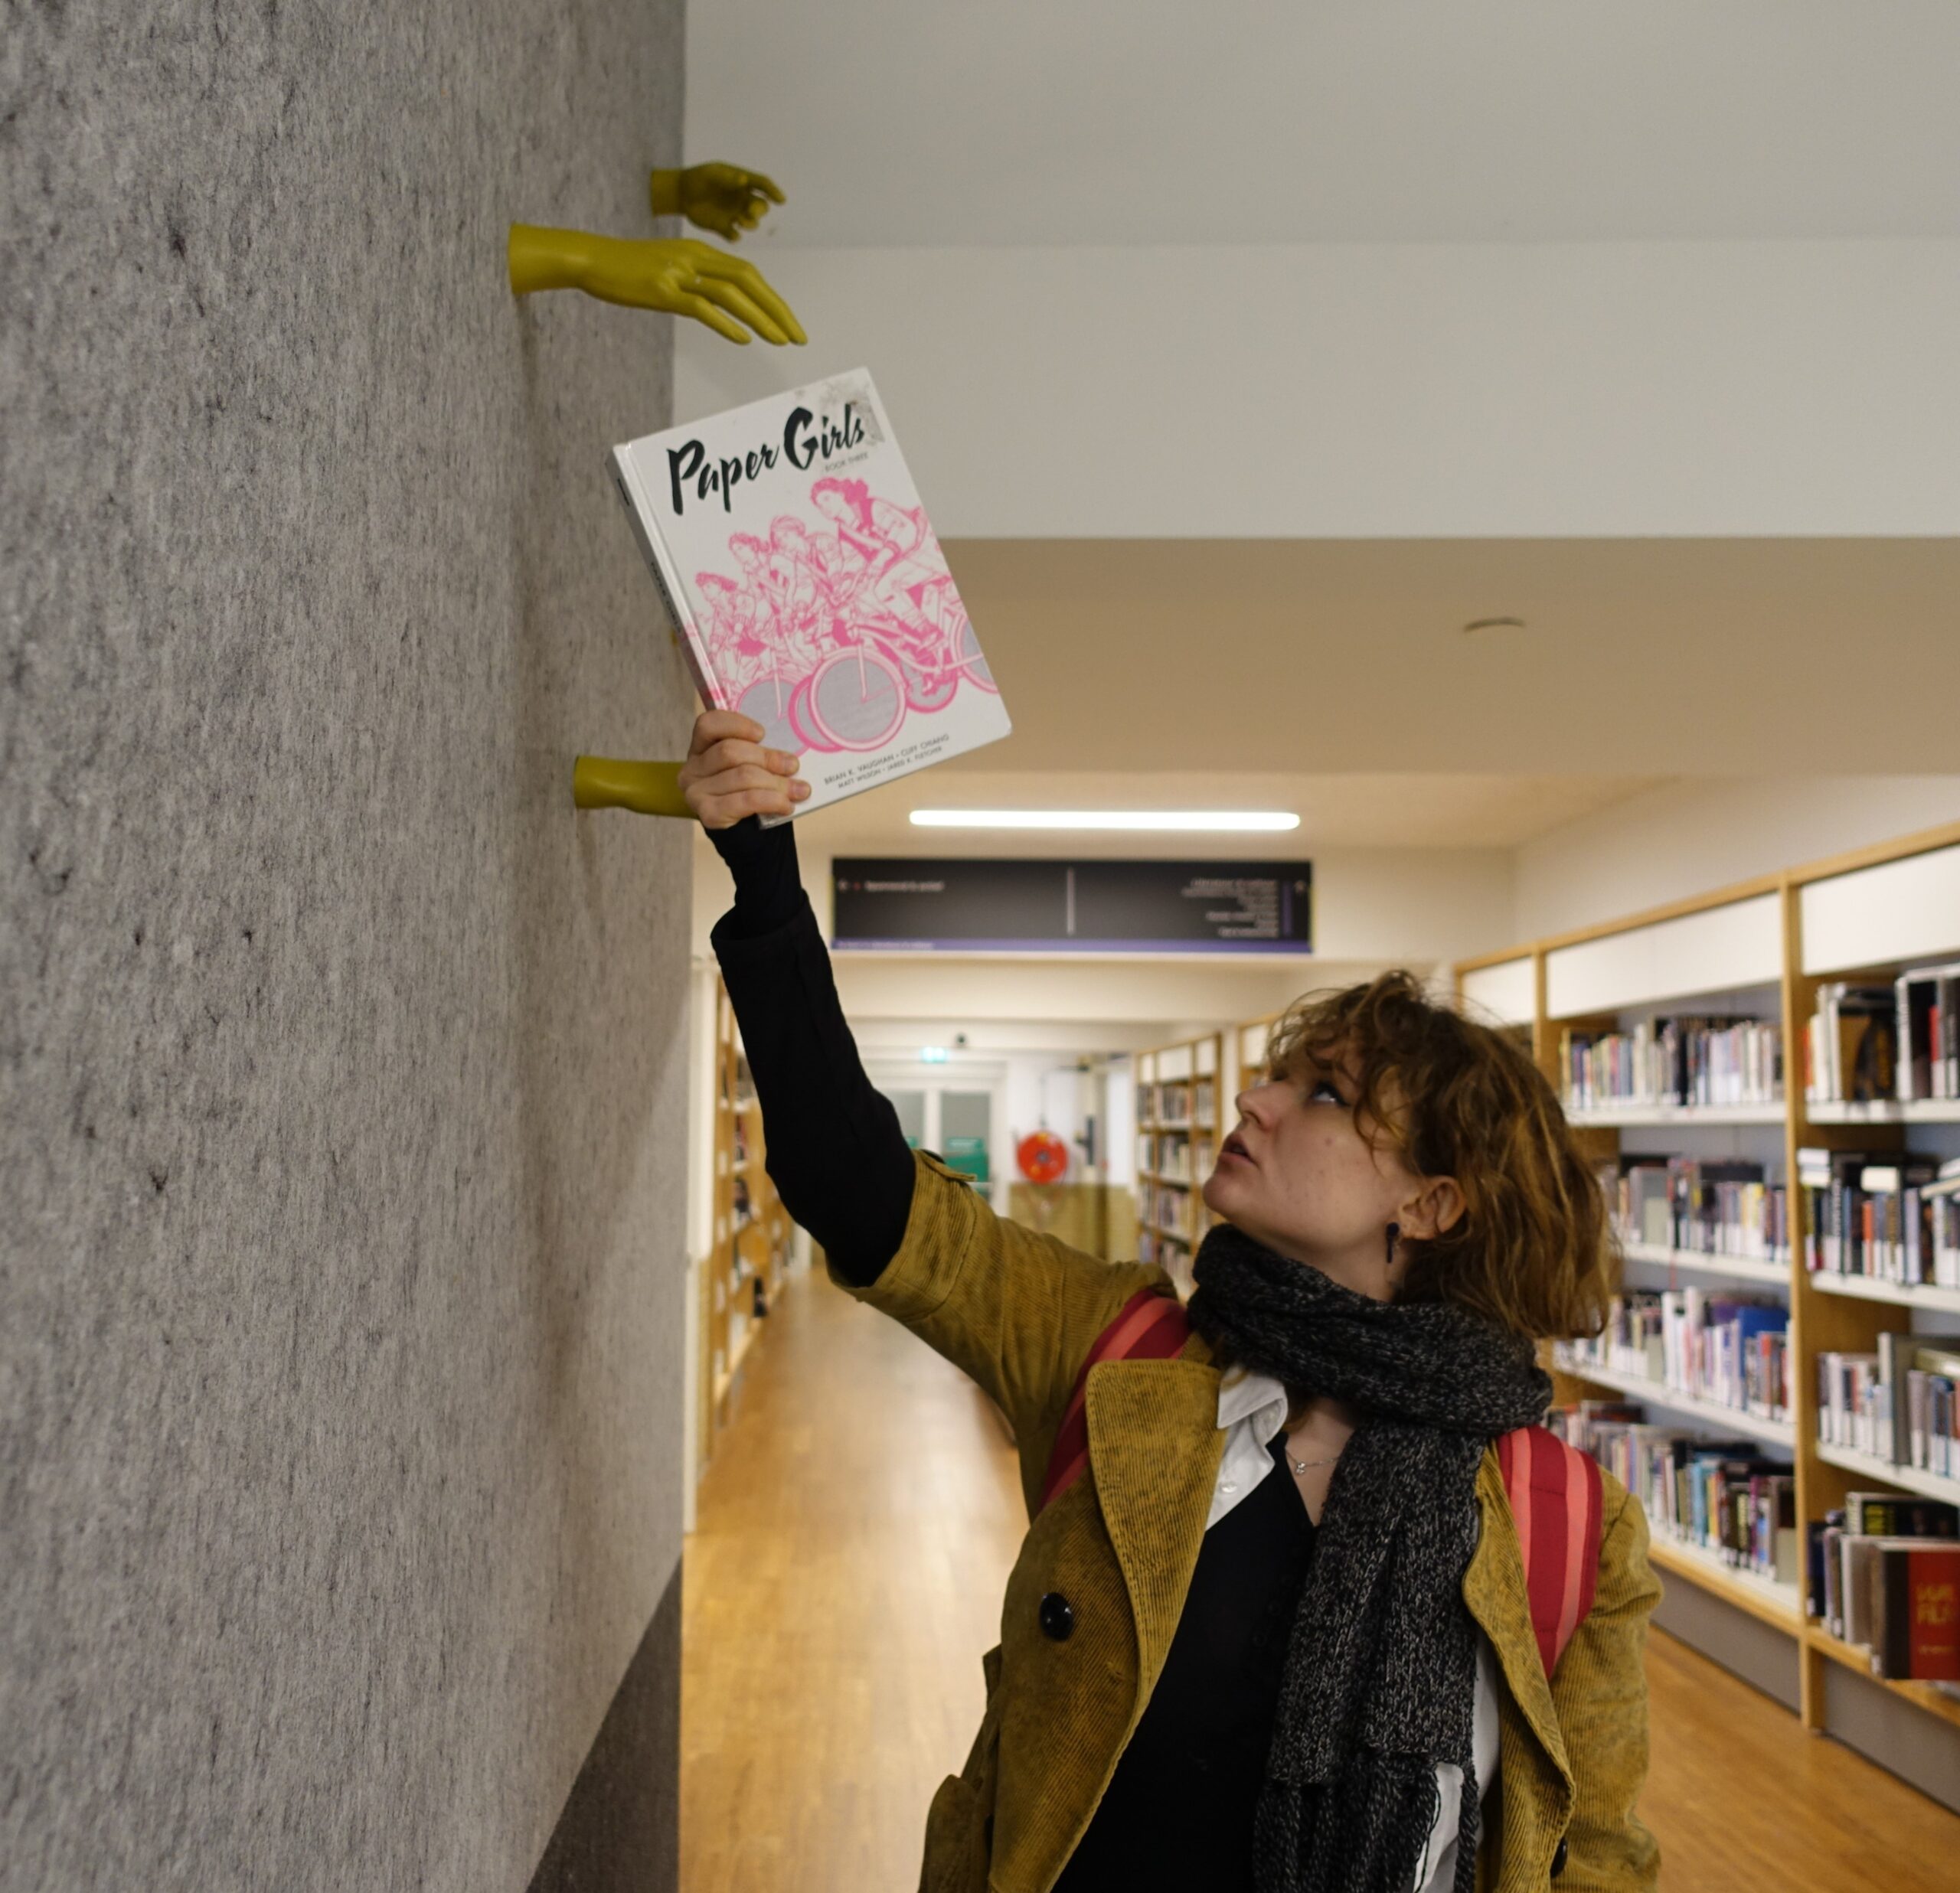 A young person reaches their right hand towards an art installation of a golden hand. The golden hand seems to be handing them a book. The book is white with a pink drawing, and the title of the book, Paper Girls, is written in black. There are book shelves visible in the background. The background is grey felt on the left, and white and honey-coloured on the right.